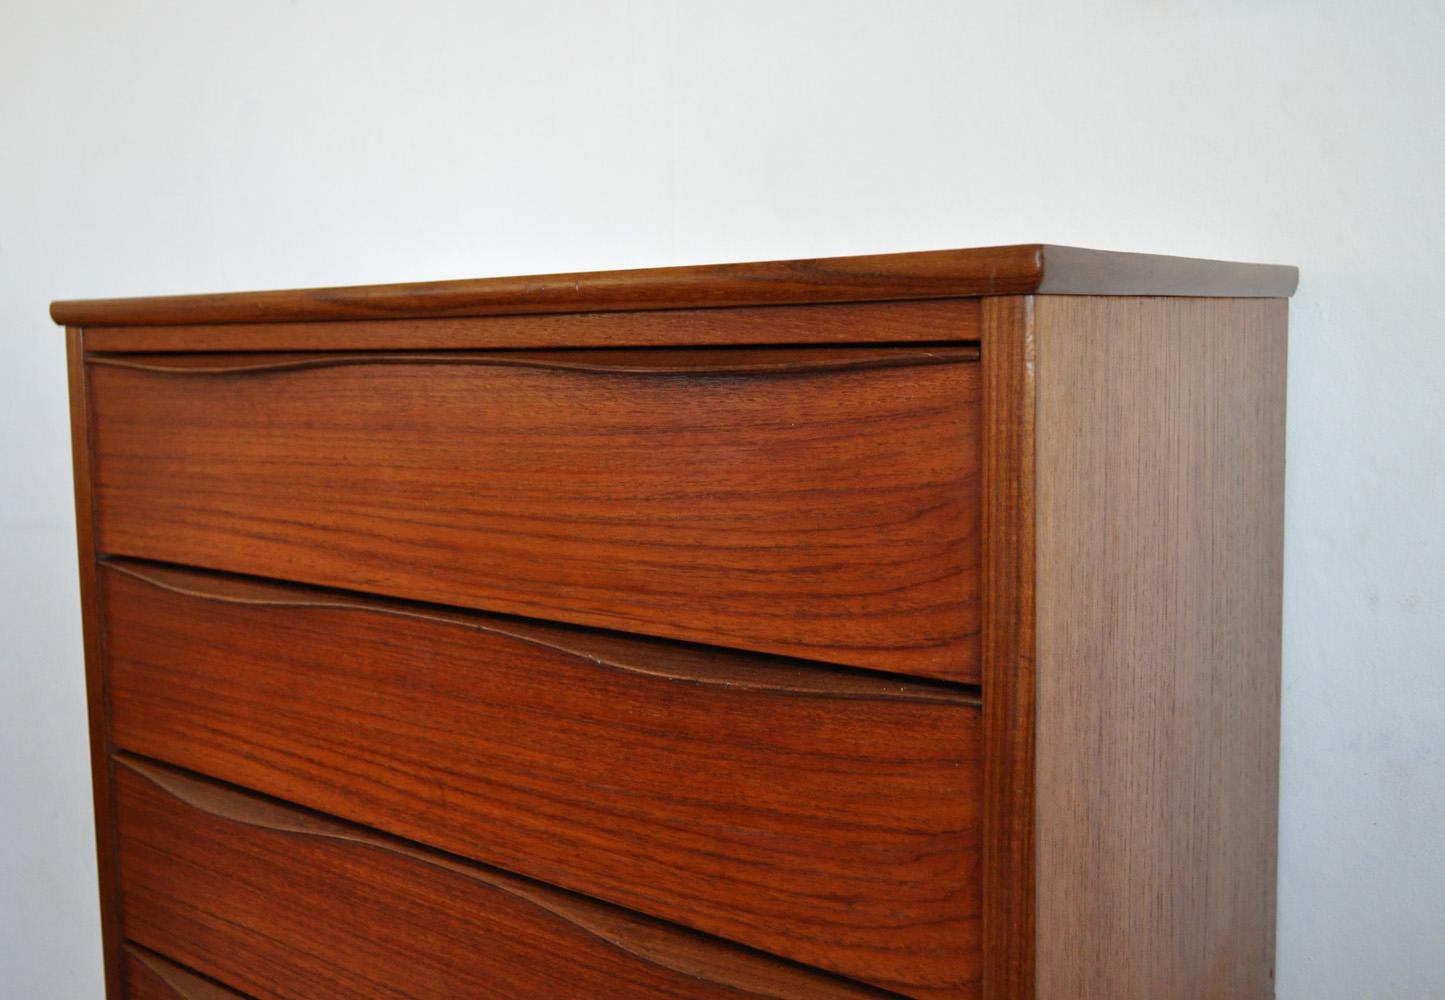 Stained Danish Modern Chest of Drawers in Teak Veneer with Six Drawers